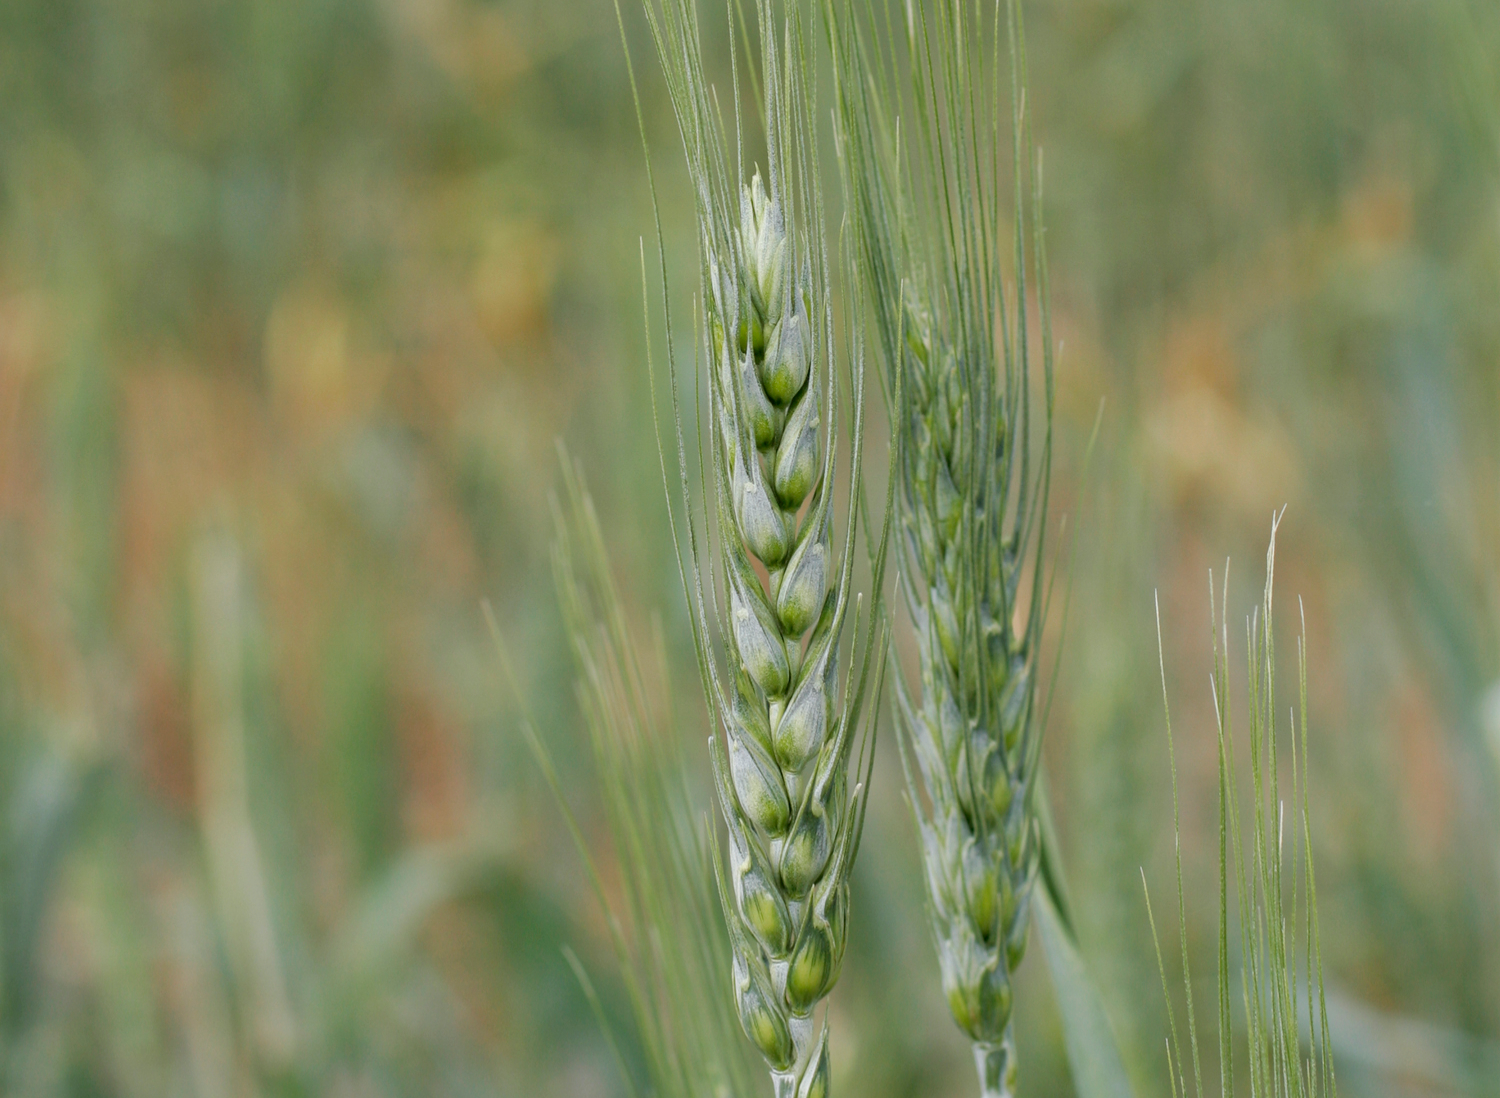 Wheat, a common symbol for farmers and farming